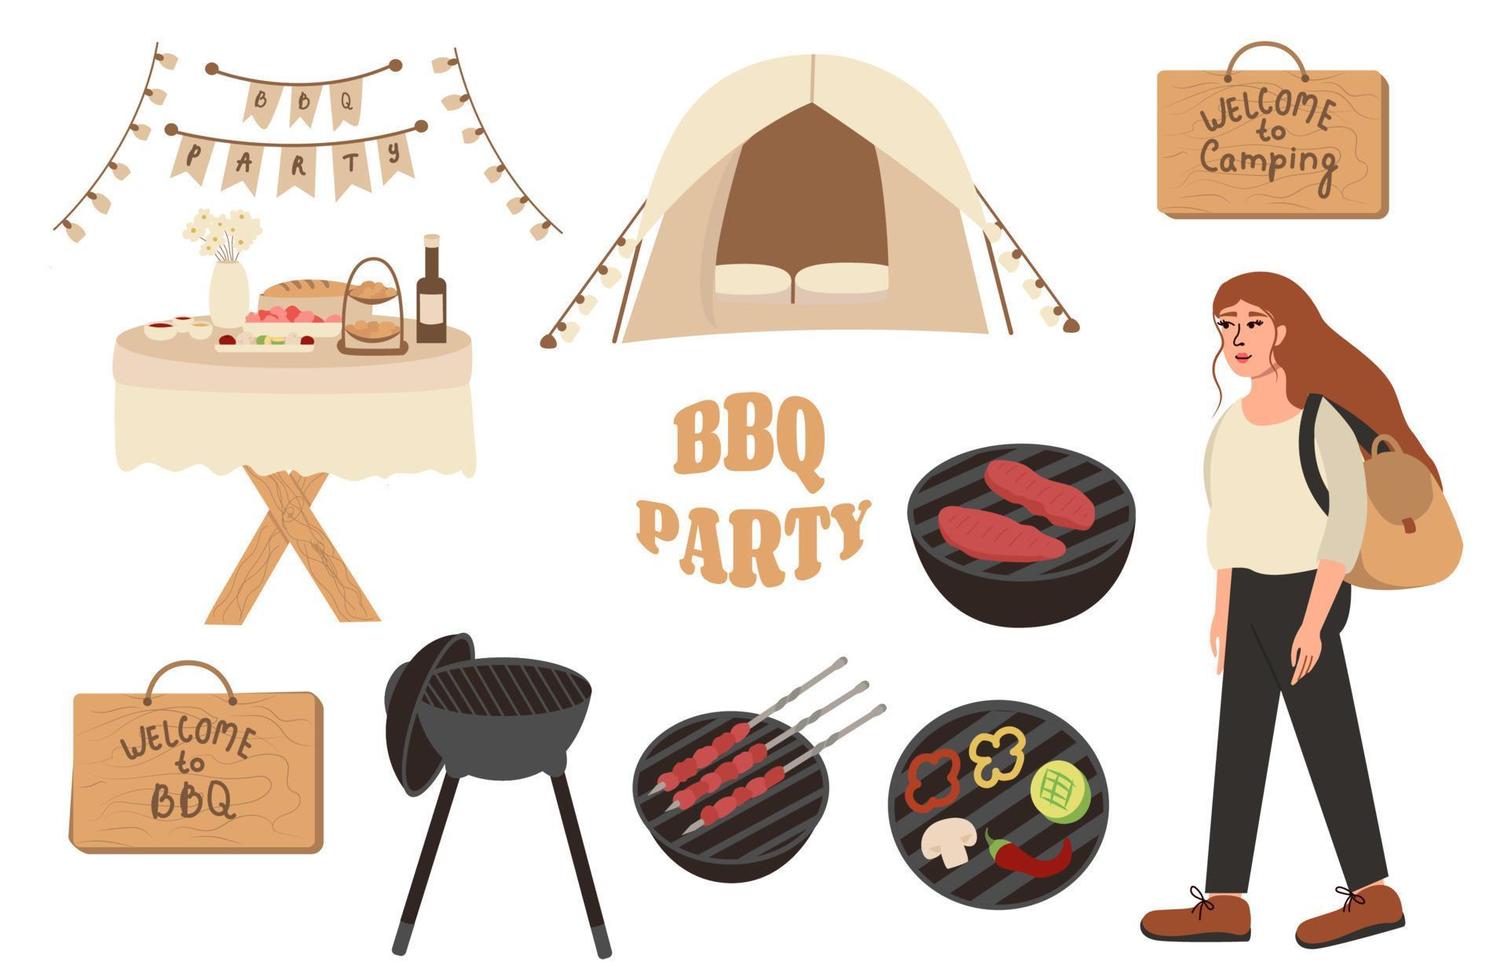 BBQ party icons set, barbecue, grill or picnic. Girl, tent, camping on vacation, barbecue grill, table for food. Vector summer illustration for barbecue.